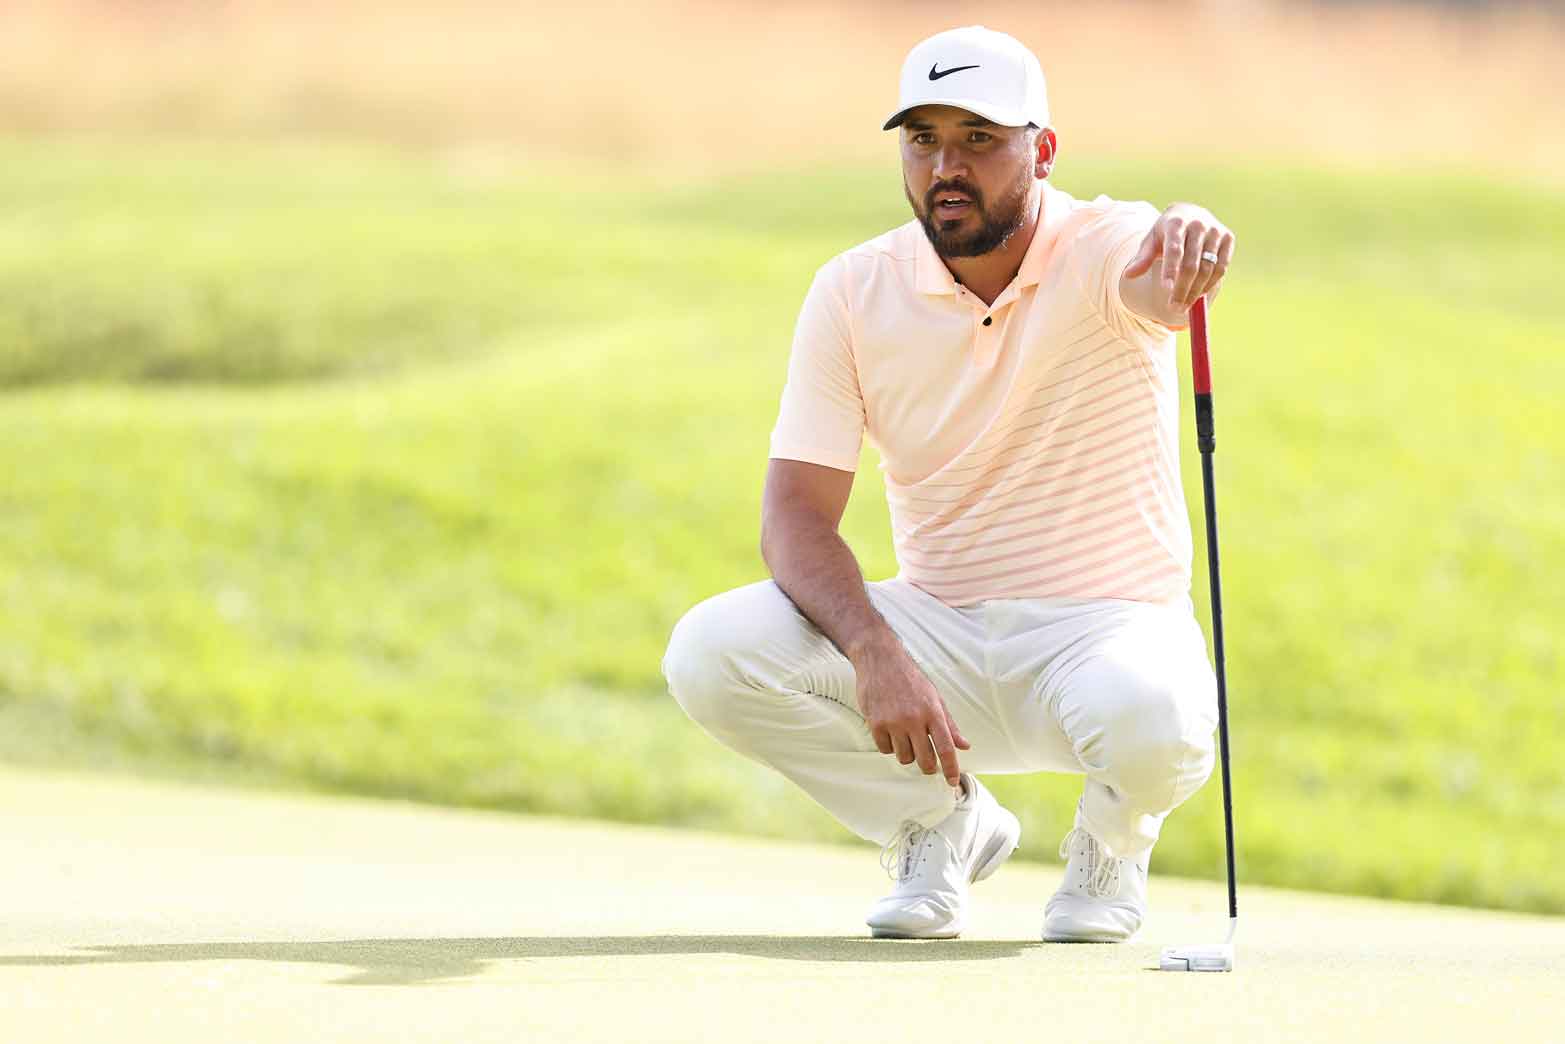 Jason Day 2022 Schedule One Key To Jason Day's Resurgent Play? A Putter Switch To An Old Favorite